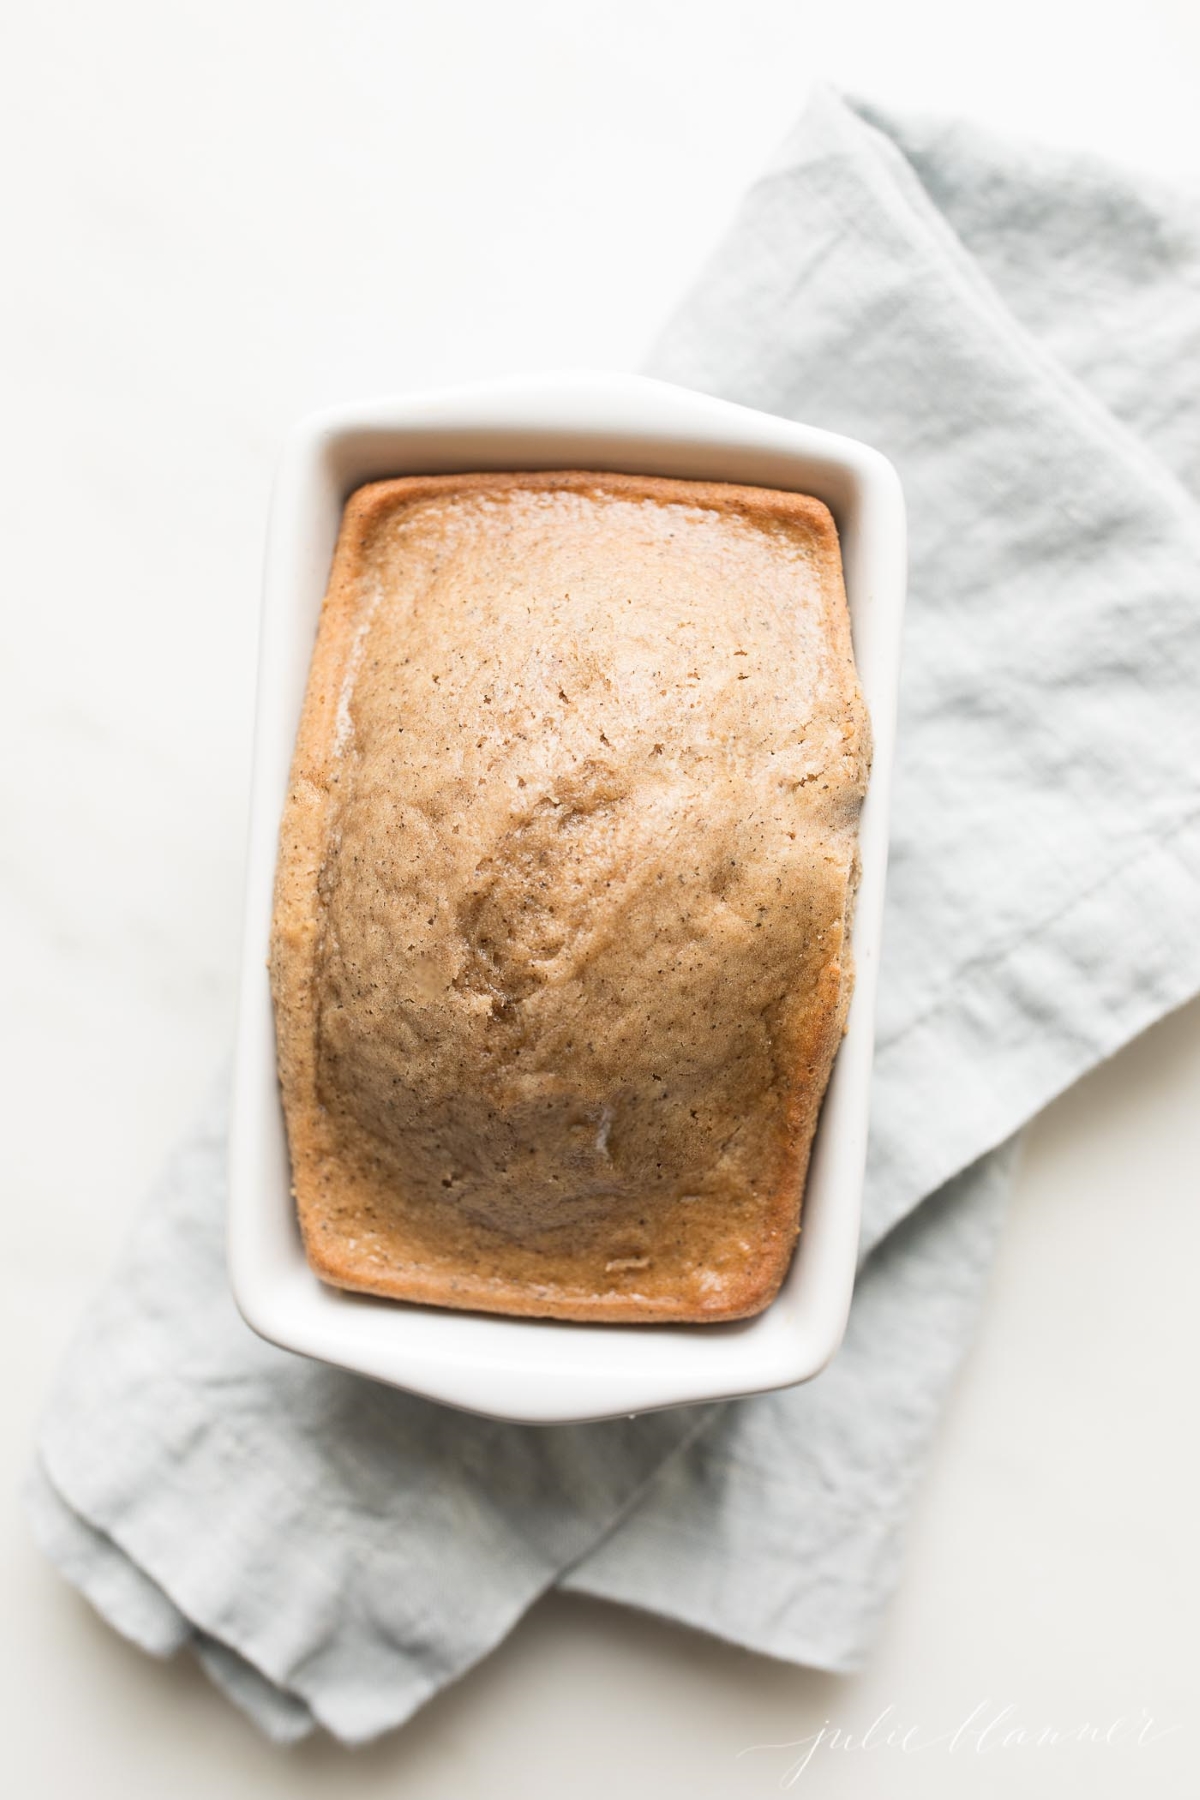 An espresso bread in a small white loaf pan, on a blue kitchen towel.